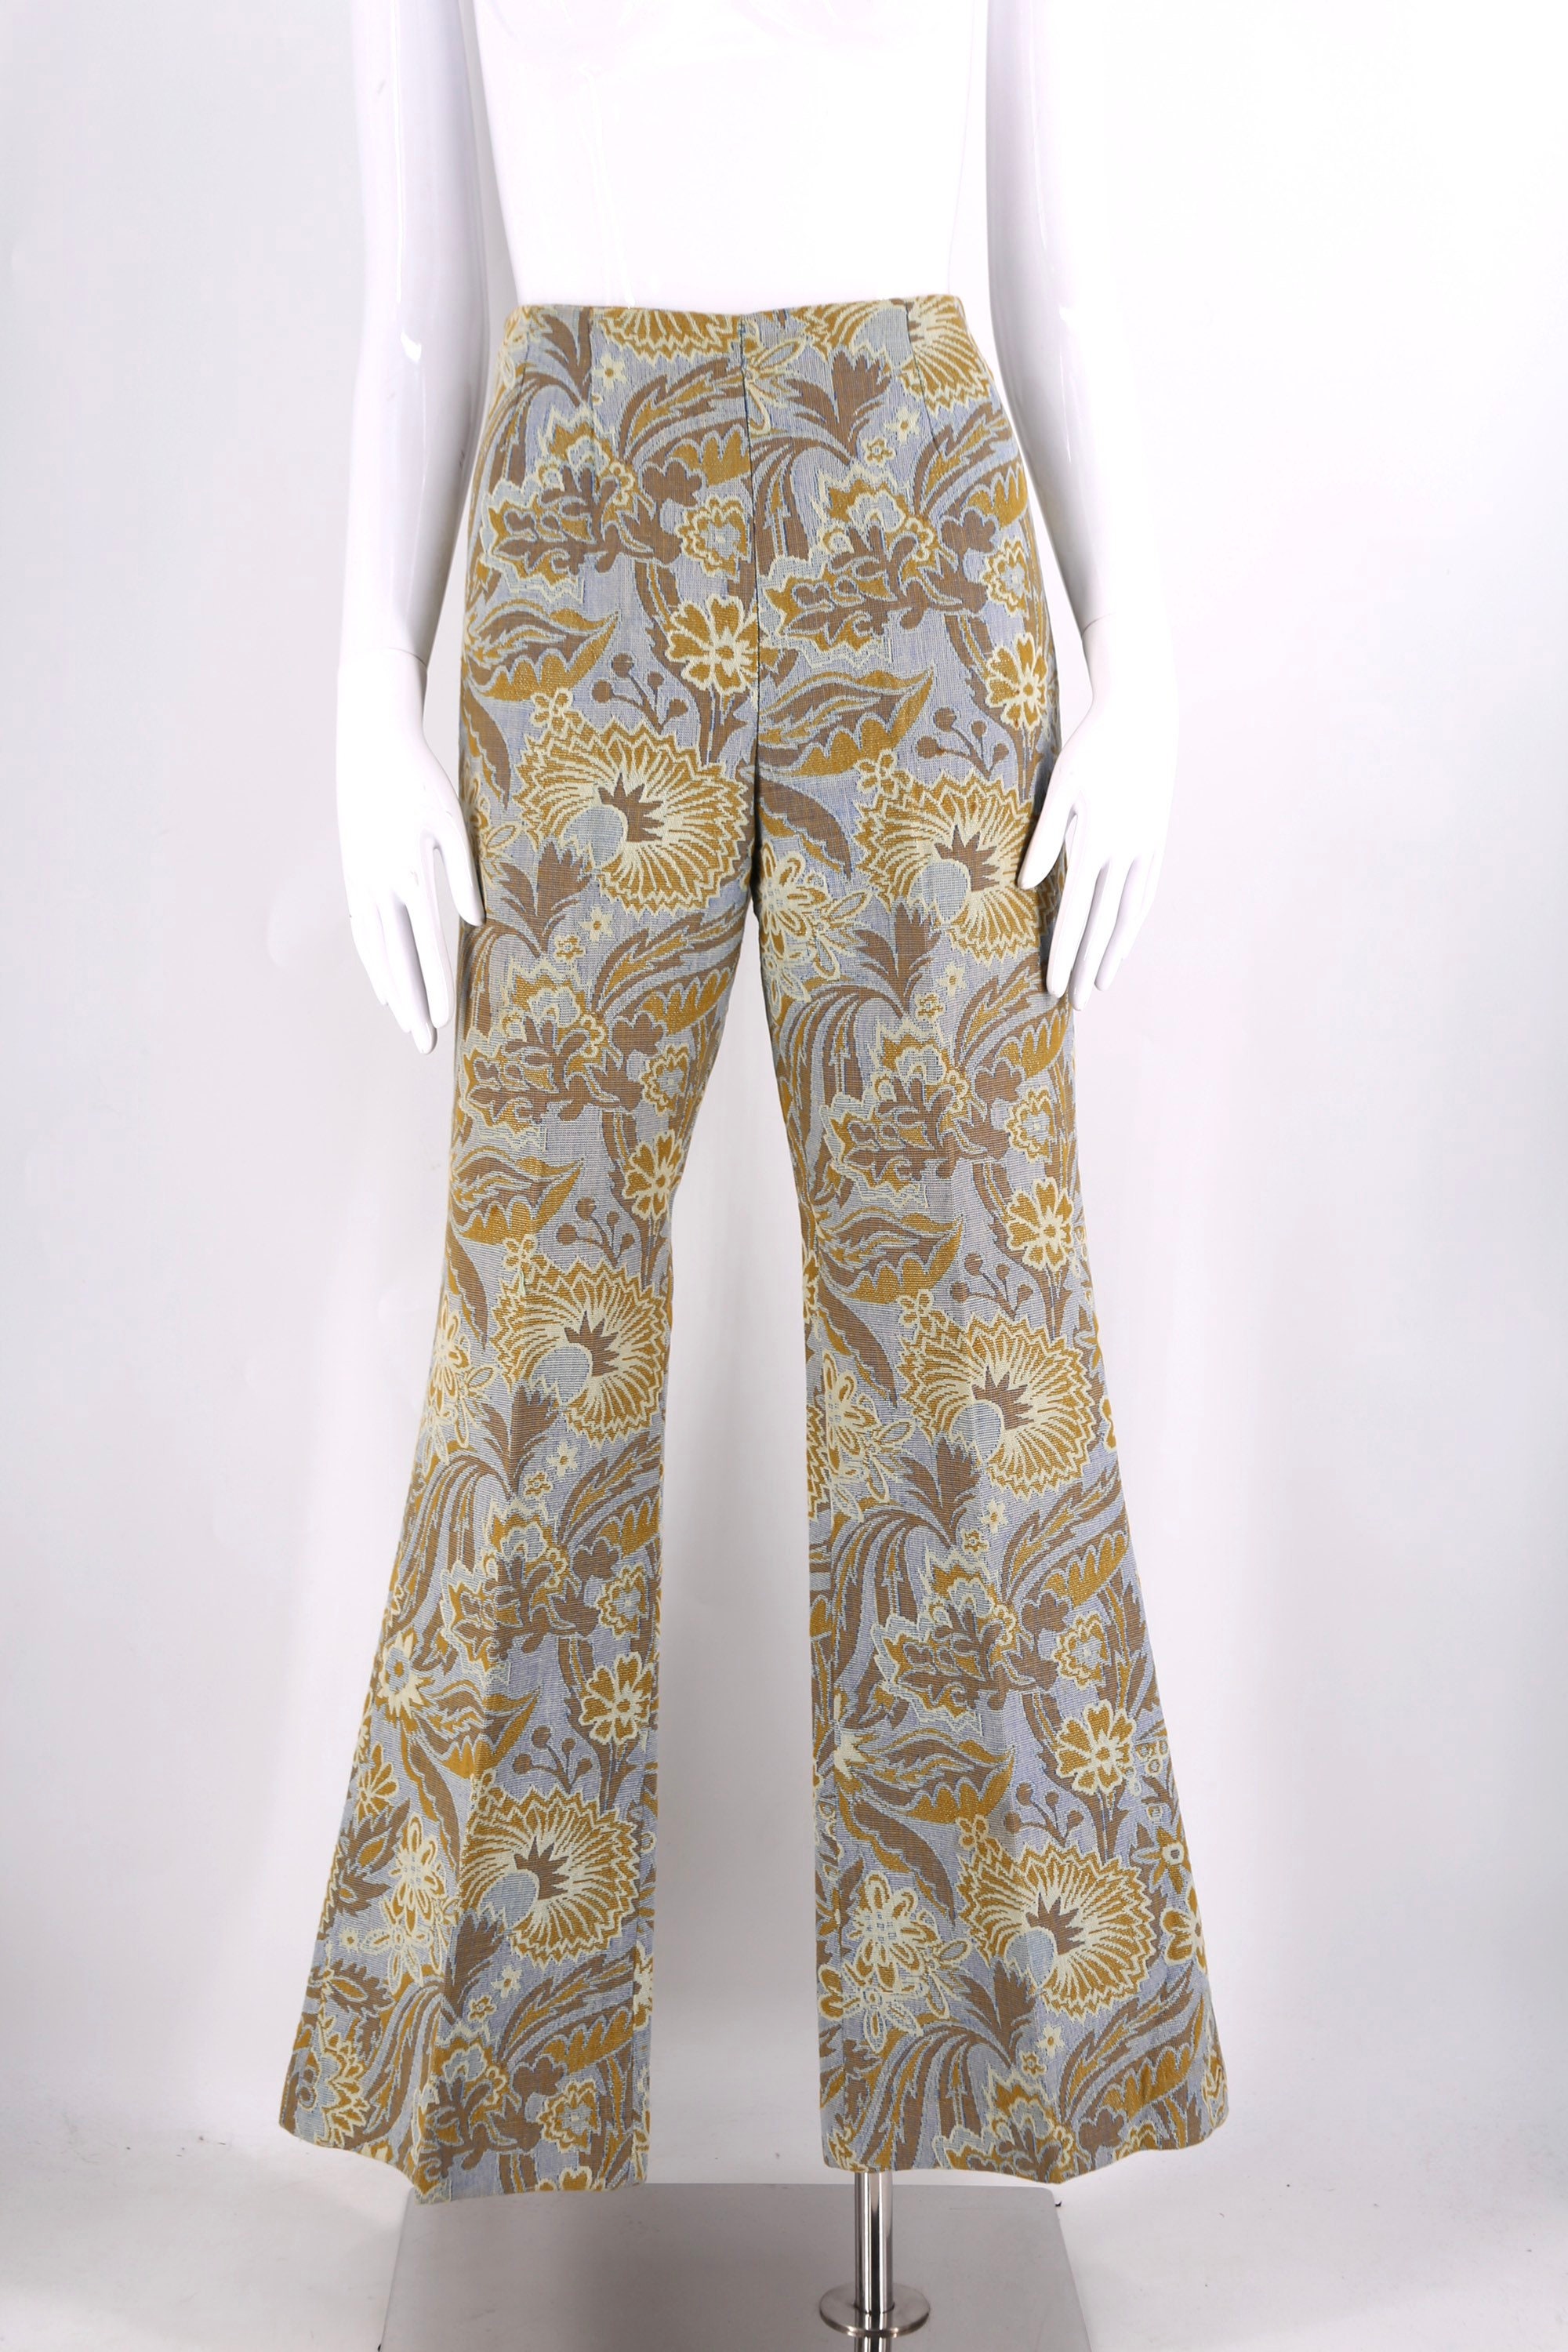 60s TAPESTRY floral bell bottoms pants sz 28 / vintage 1960s Country ...